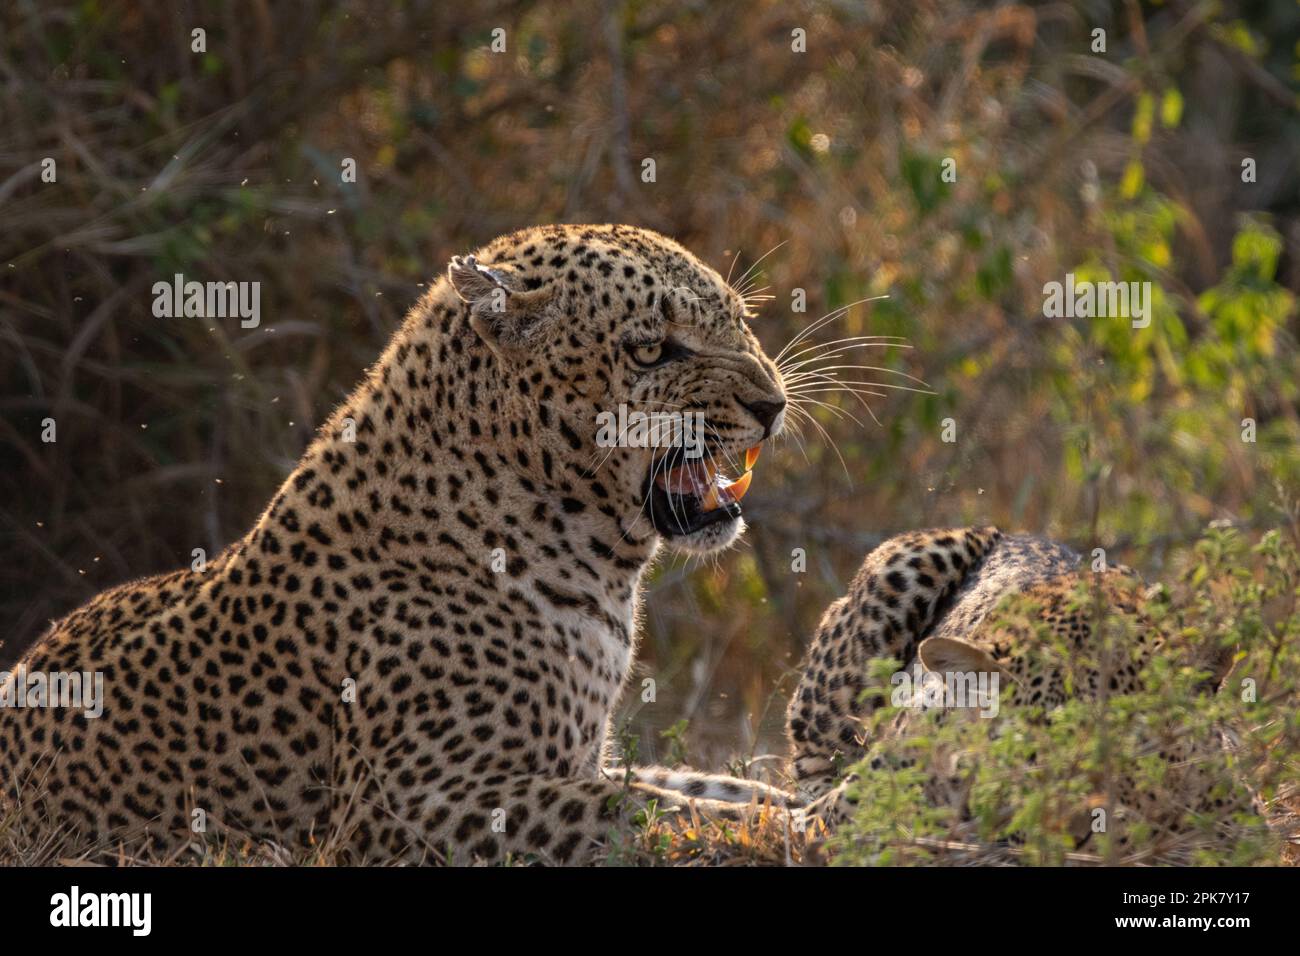 A male leopard, Panthera pardus, snarling. Stock Photo